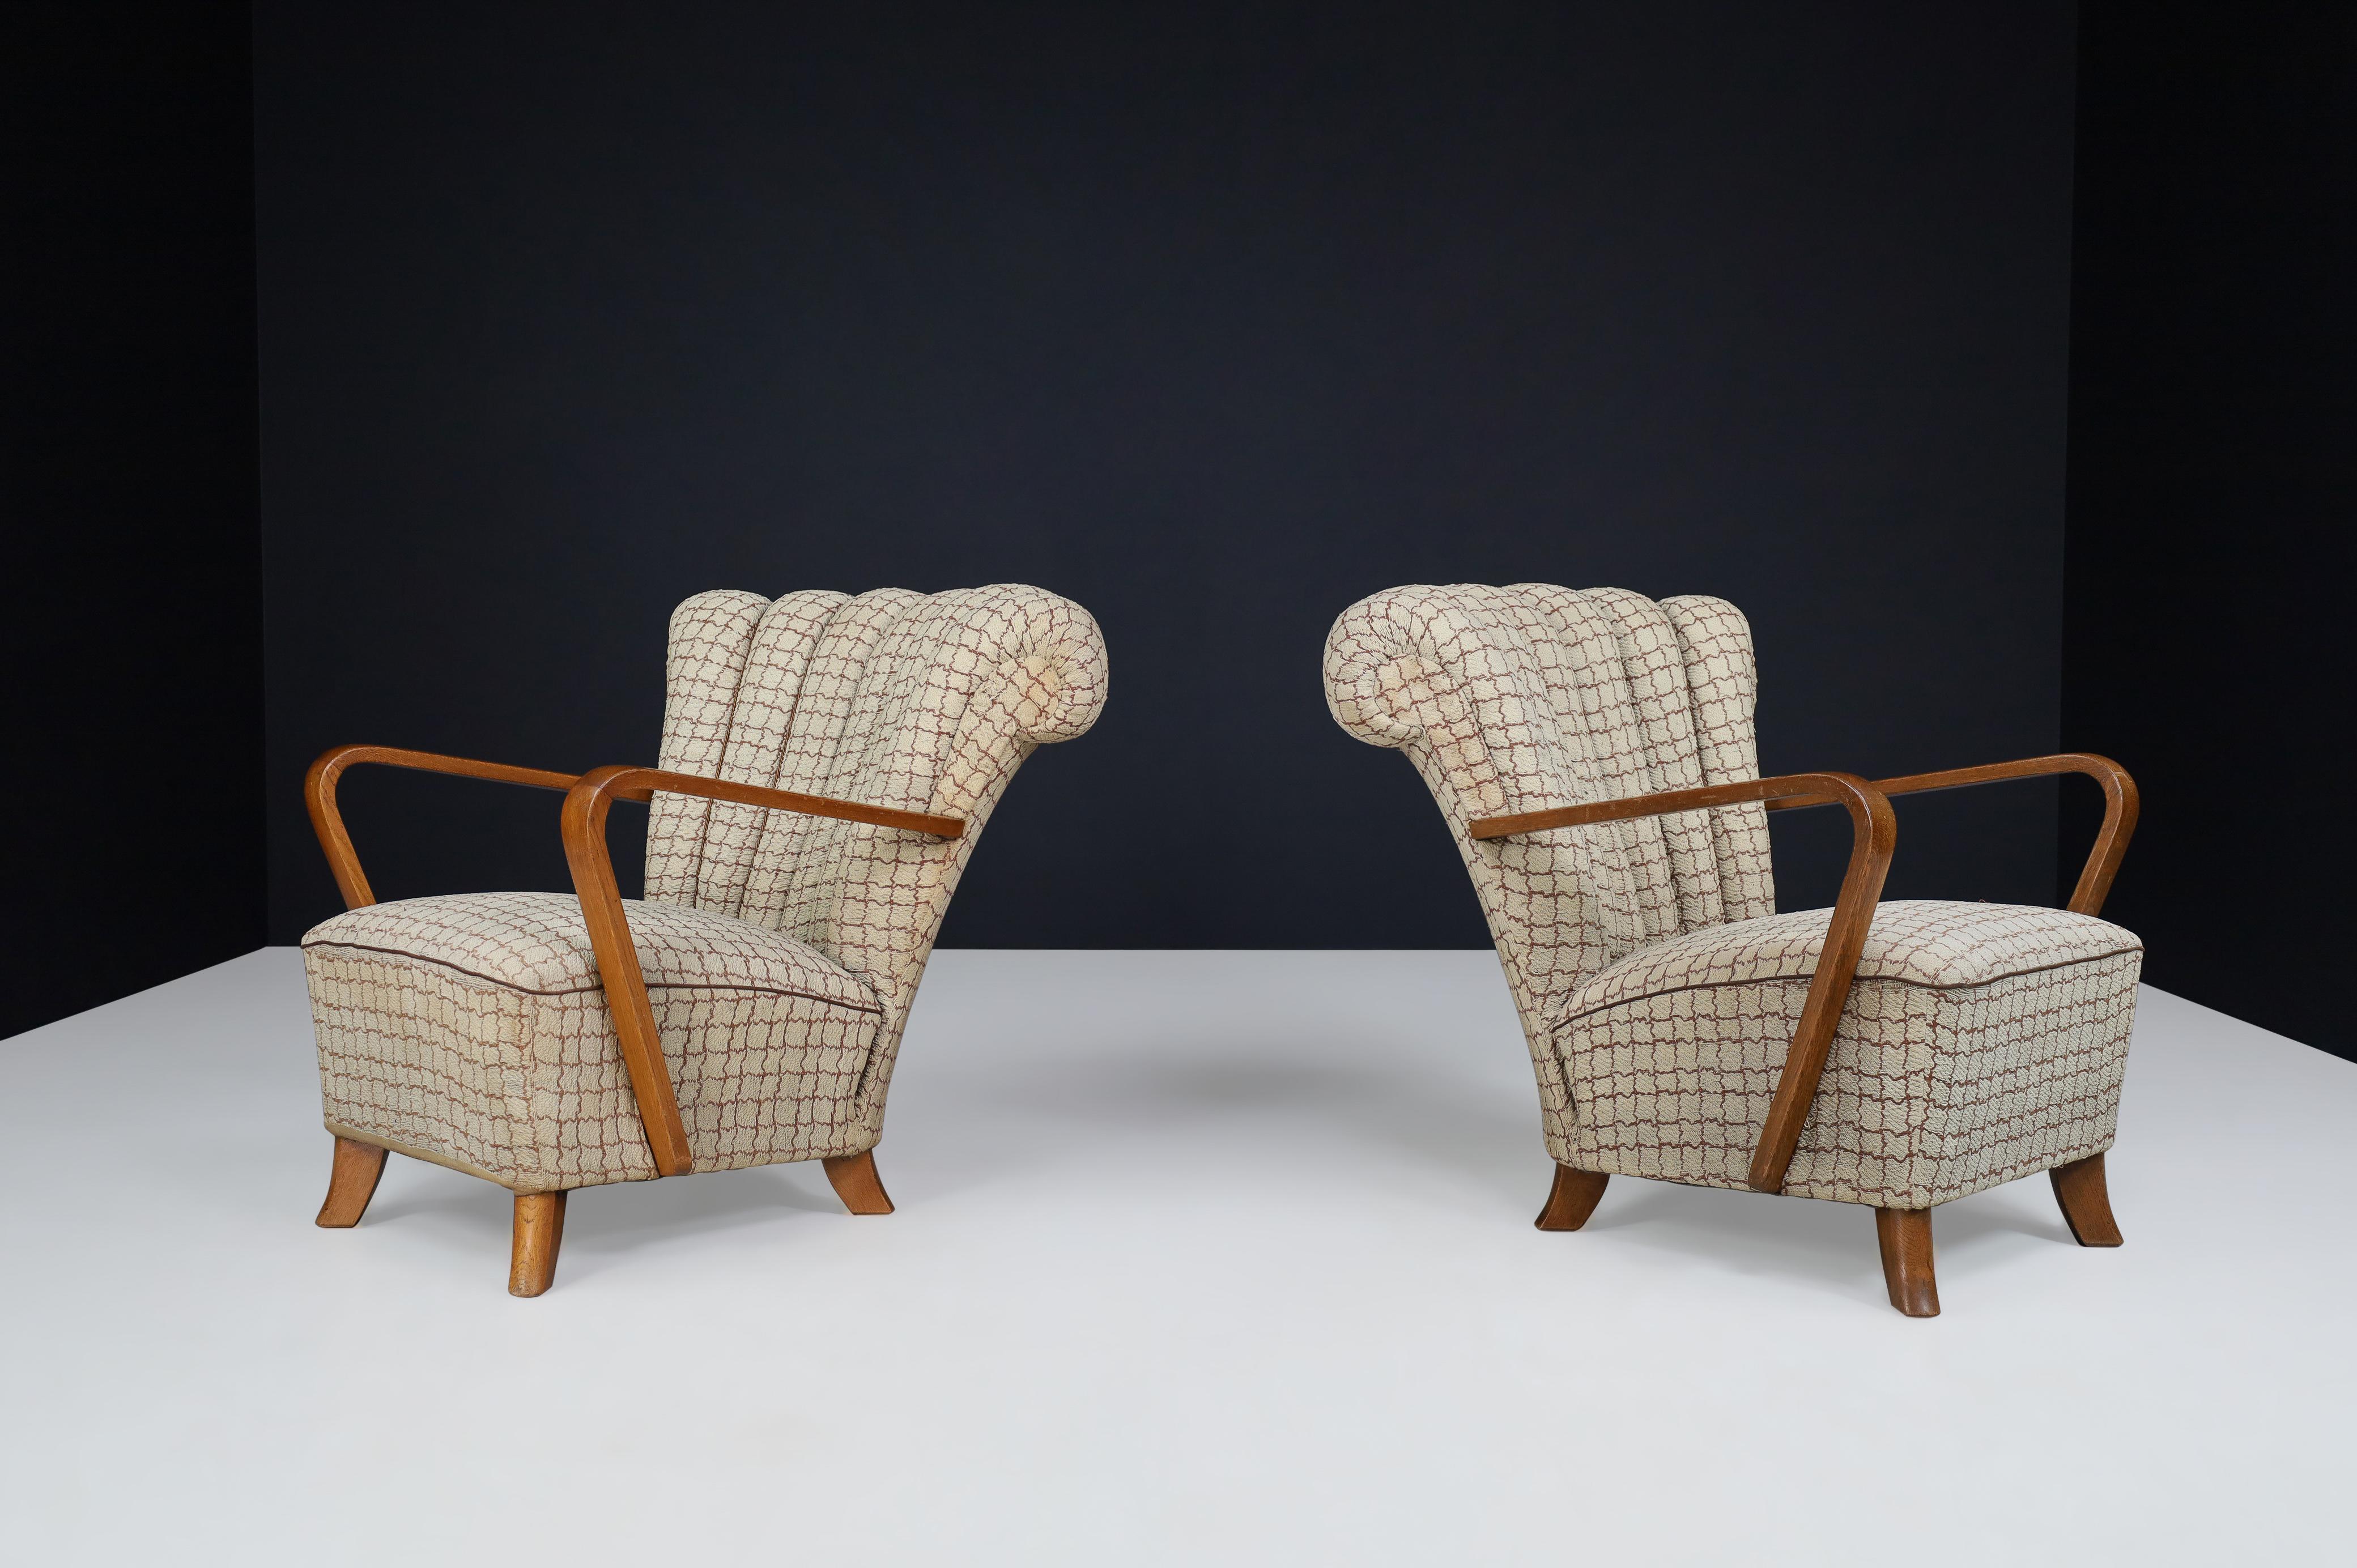 Art Deco fan-shaped armchairs in bentwood and original upholstery, Praque 1930s 

Art Deco fan-shaped armchairs in bentwood and original upholstery, Praque 1930s. These remarkable armchair-lounge chairs would make an eye-catching addition to any